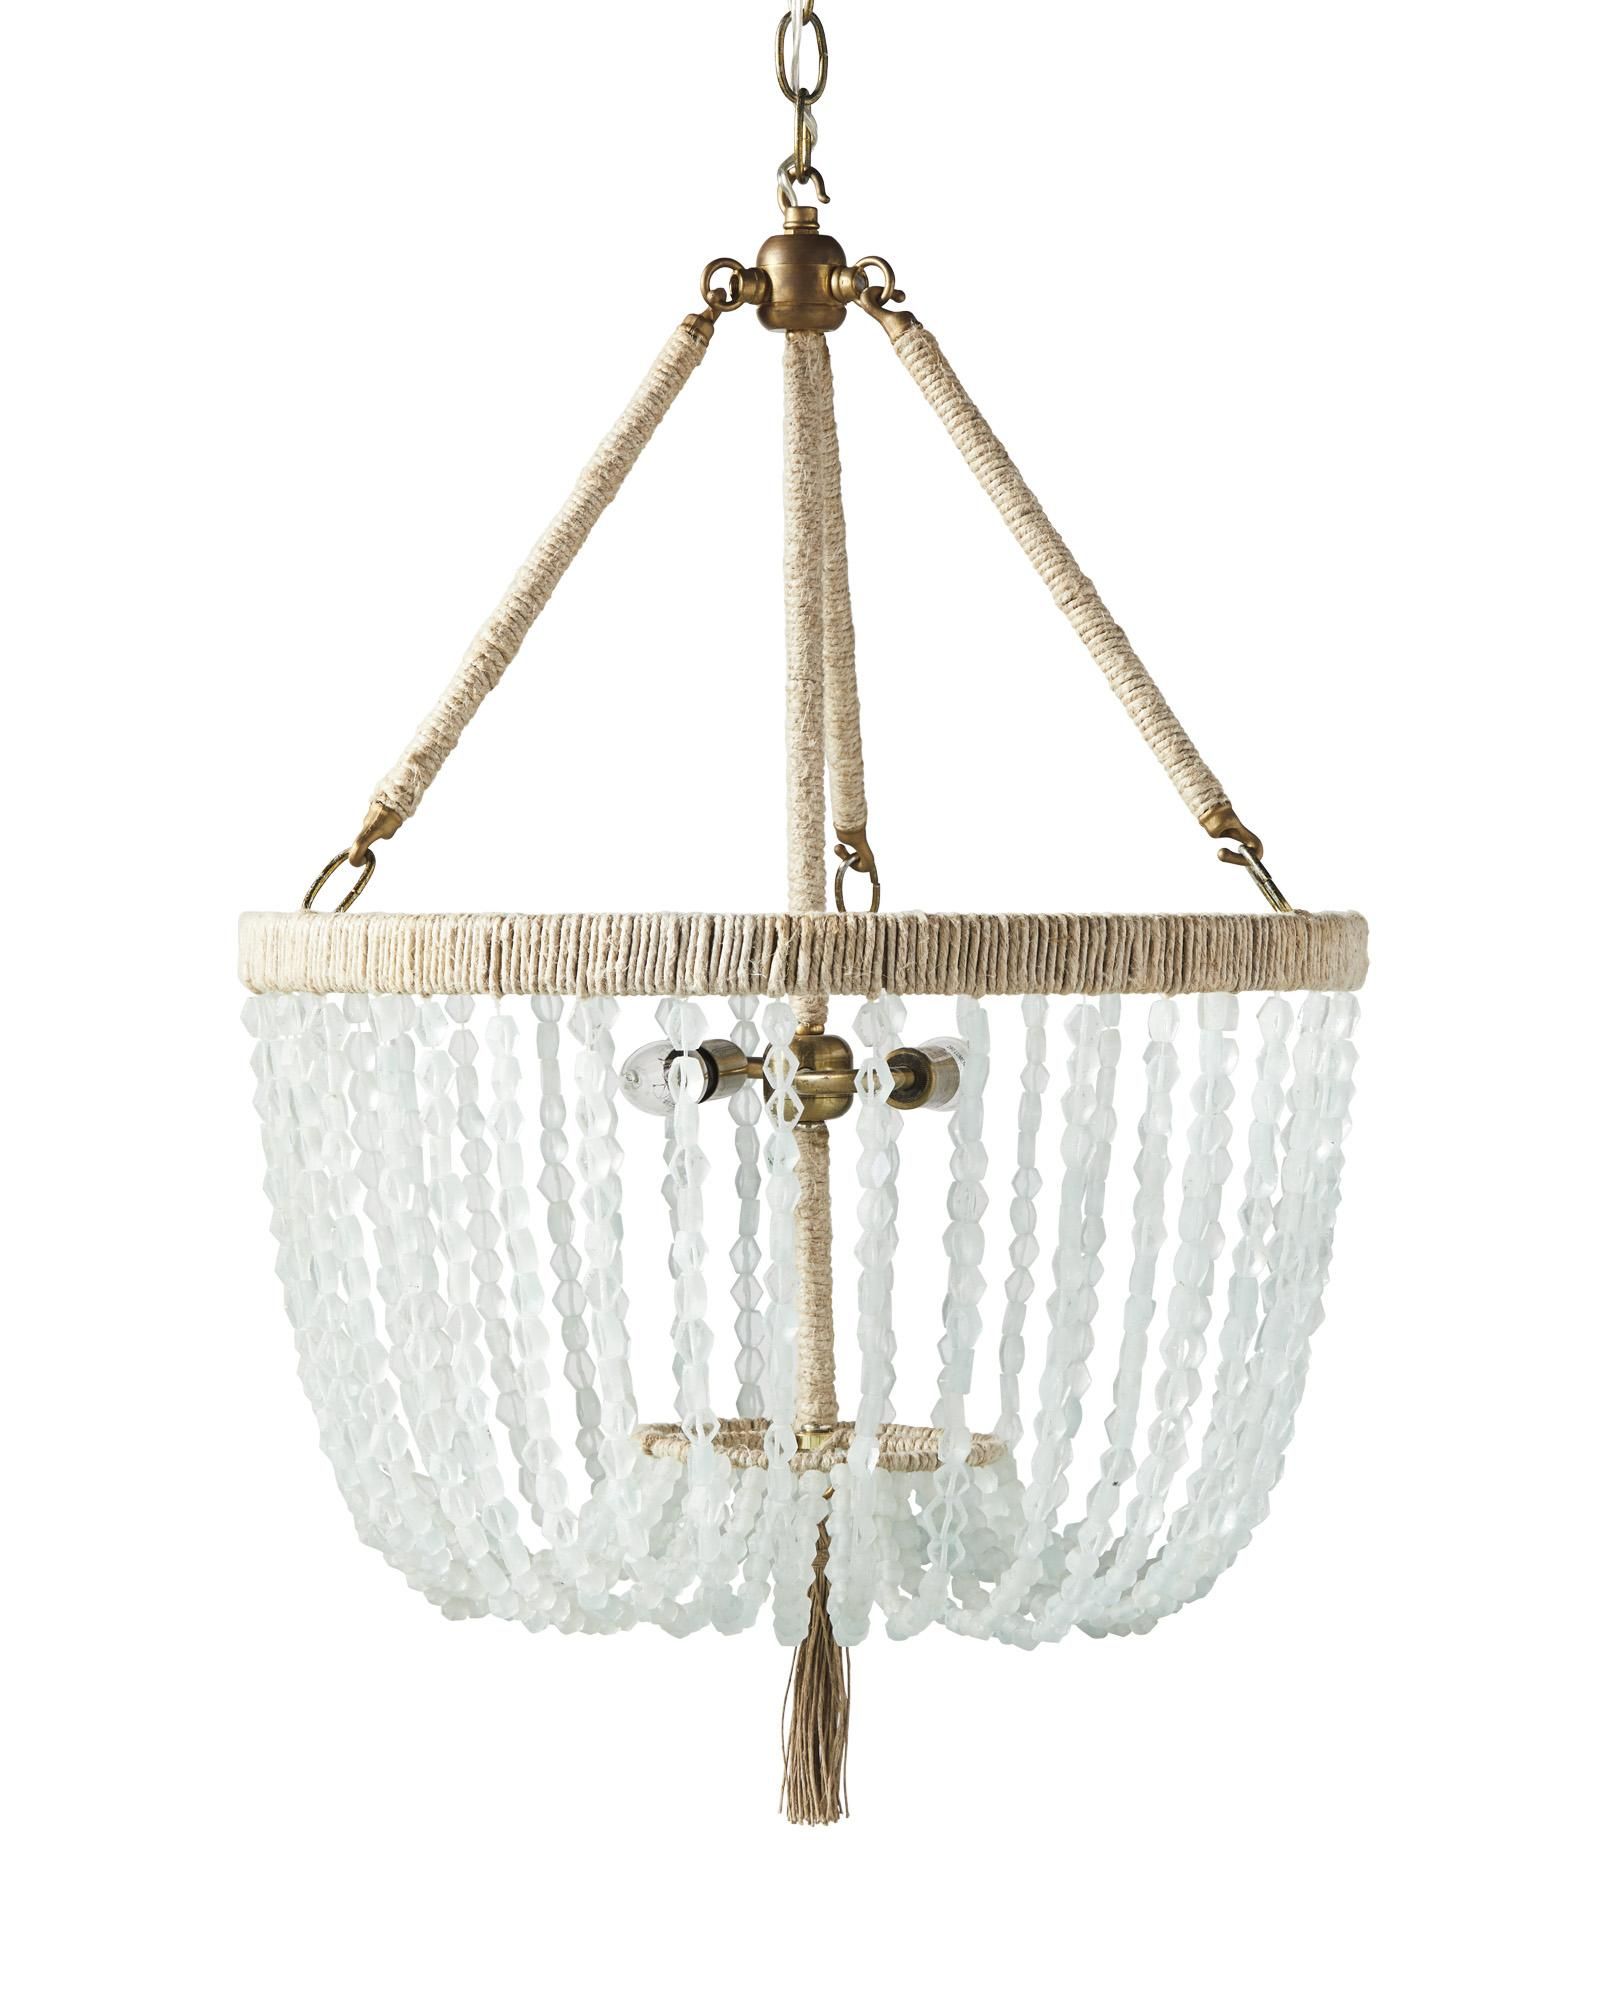 Seychelles Chandelier | Serena and Lily